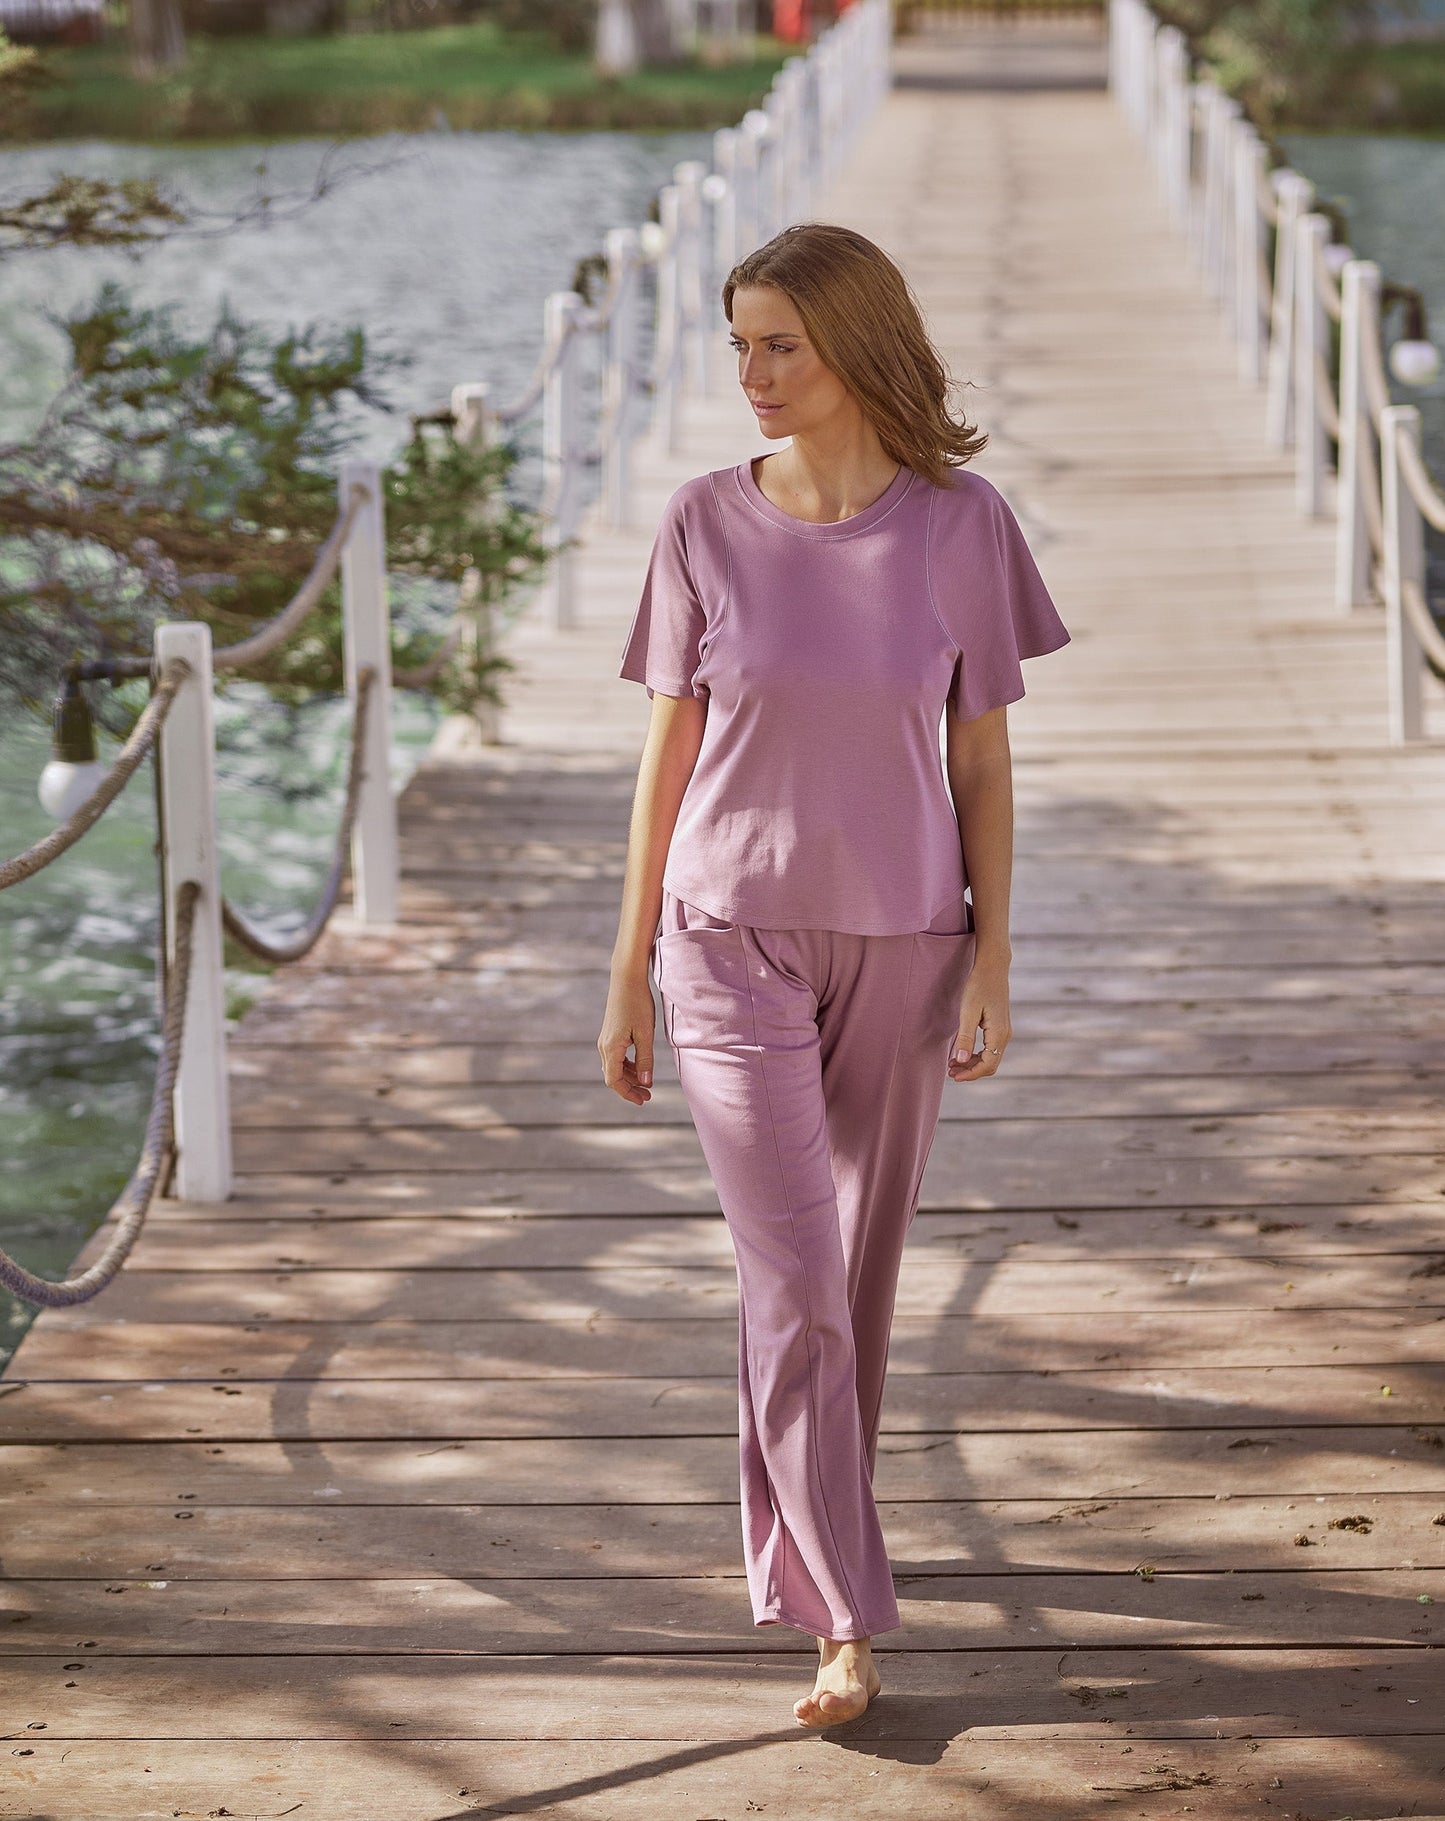 women_s-pajama-set-Straight-pant-with-pocket-detail-and-top-with-oversized-sleeves-orchid-Lavender-Dreams